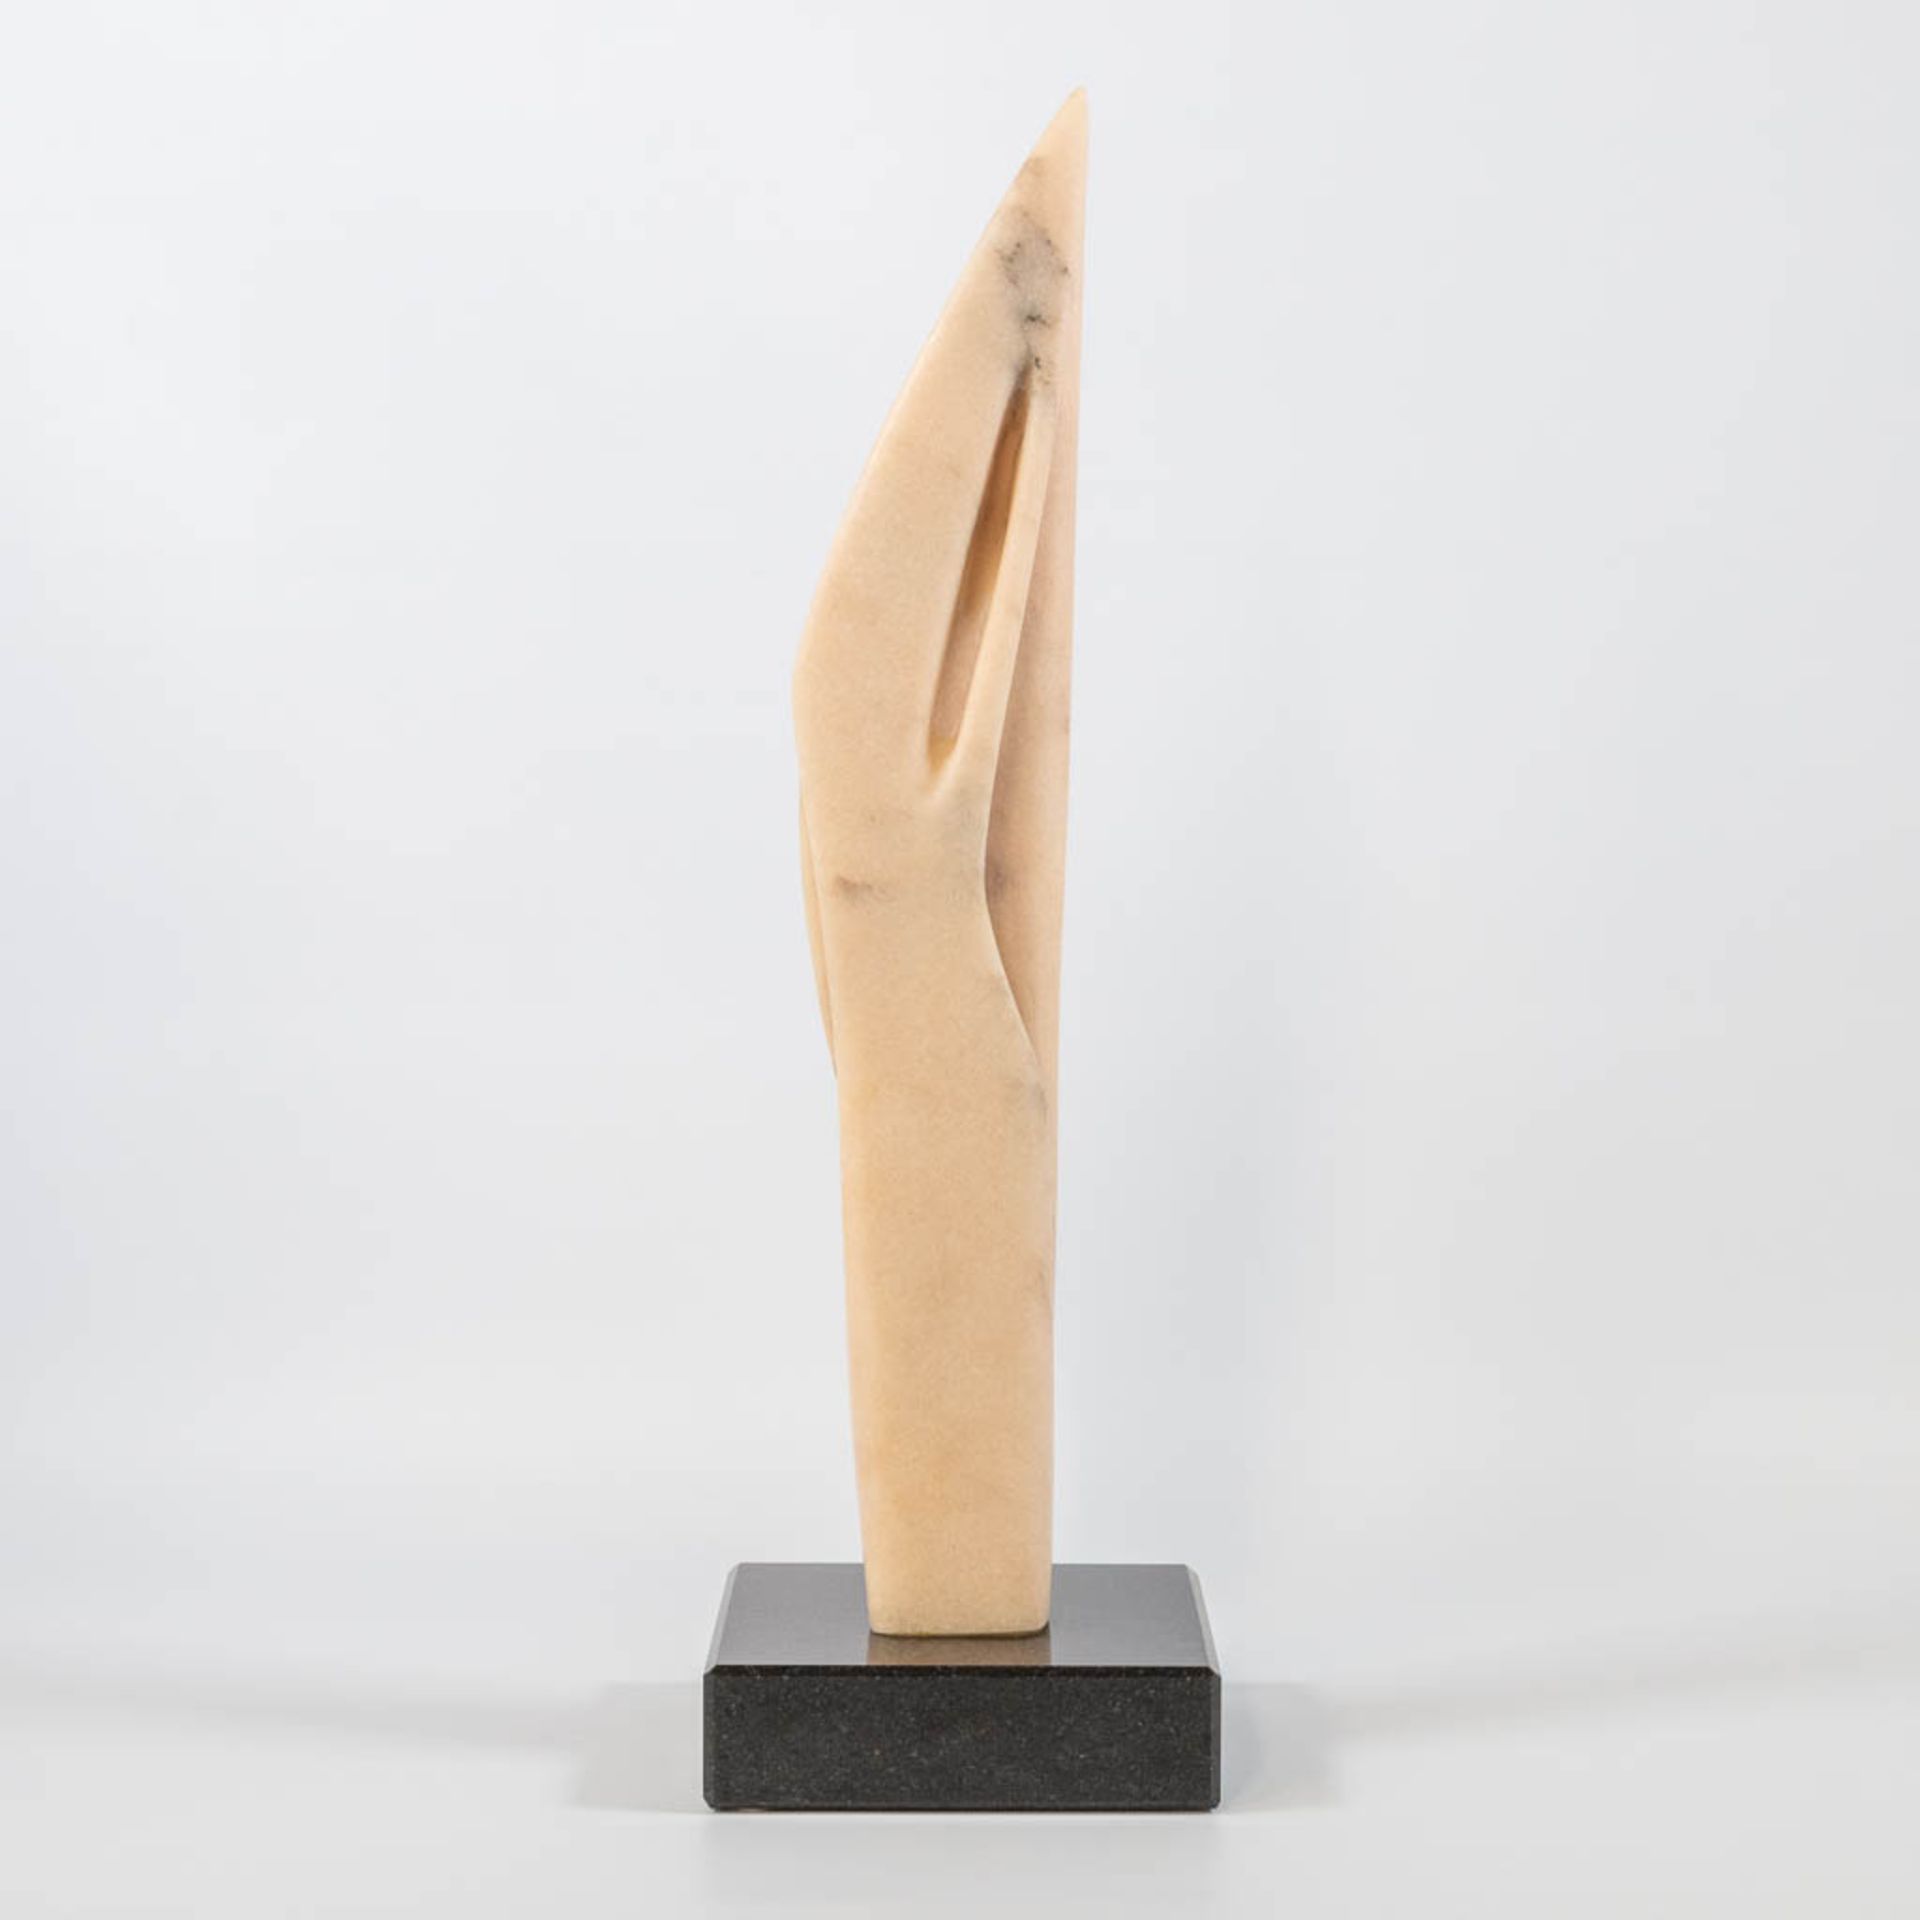 Pablo ATCHUGARRY (1954) untitled, pink Portugese marble on a black granite base. (16 x 15 x 53 cm)